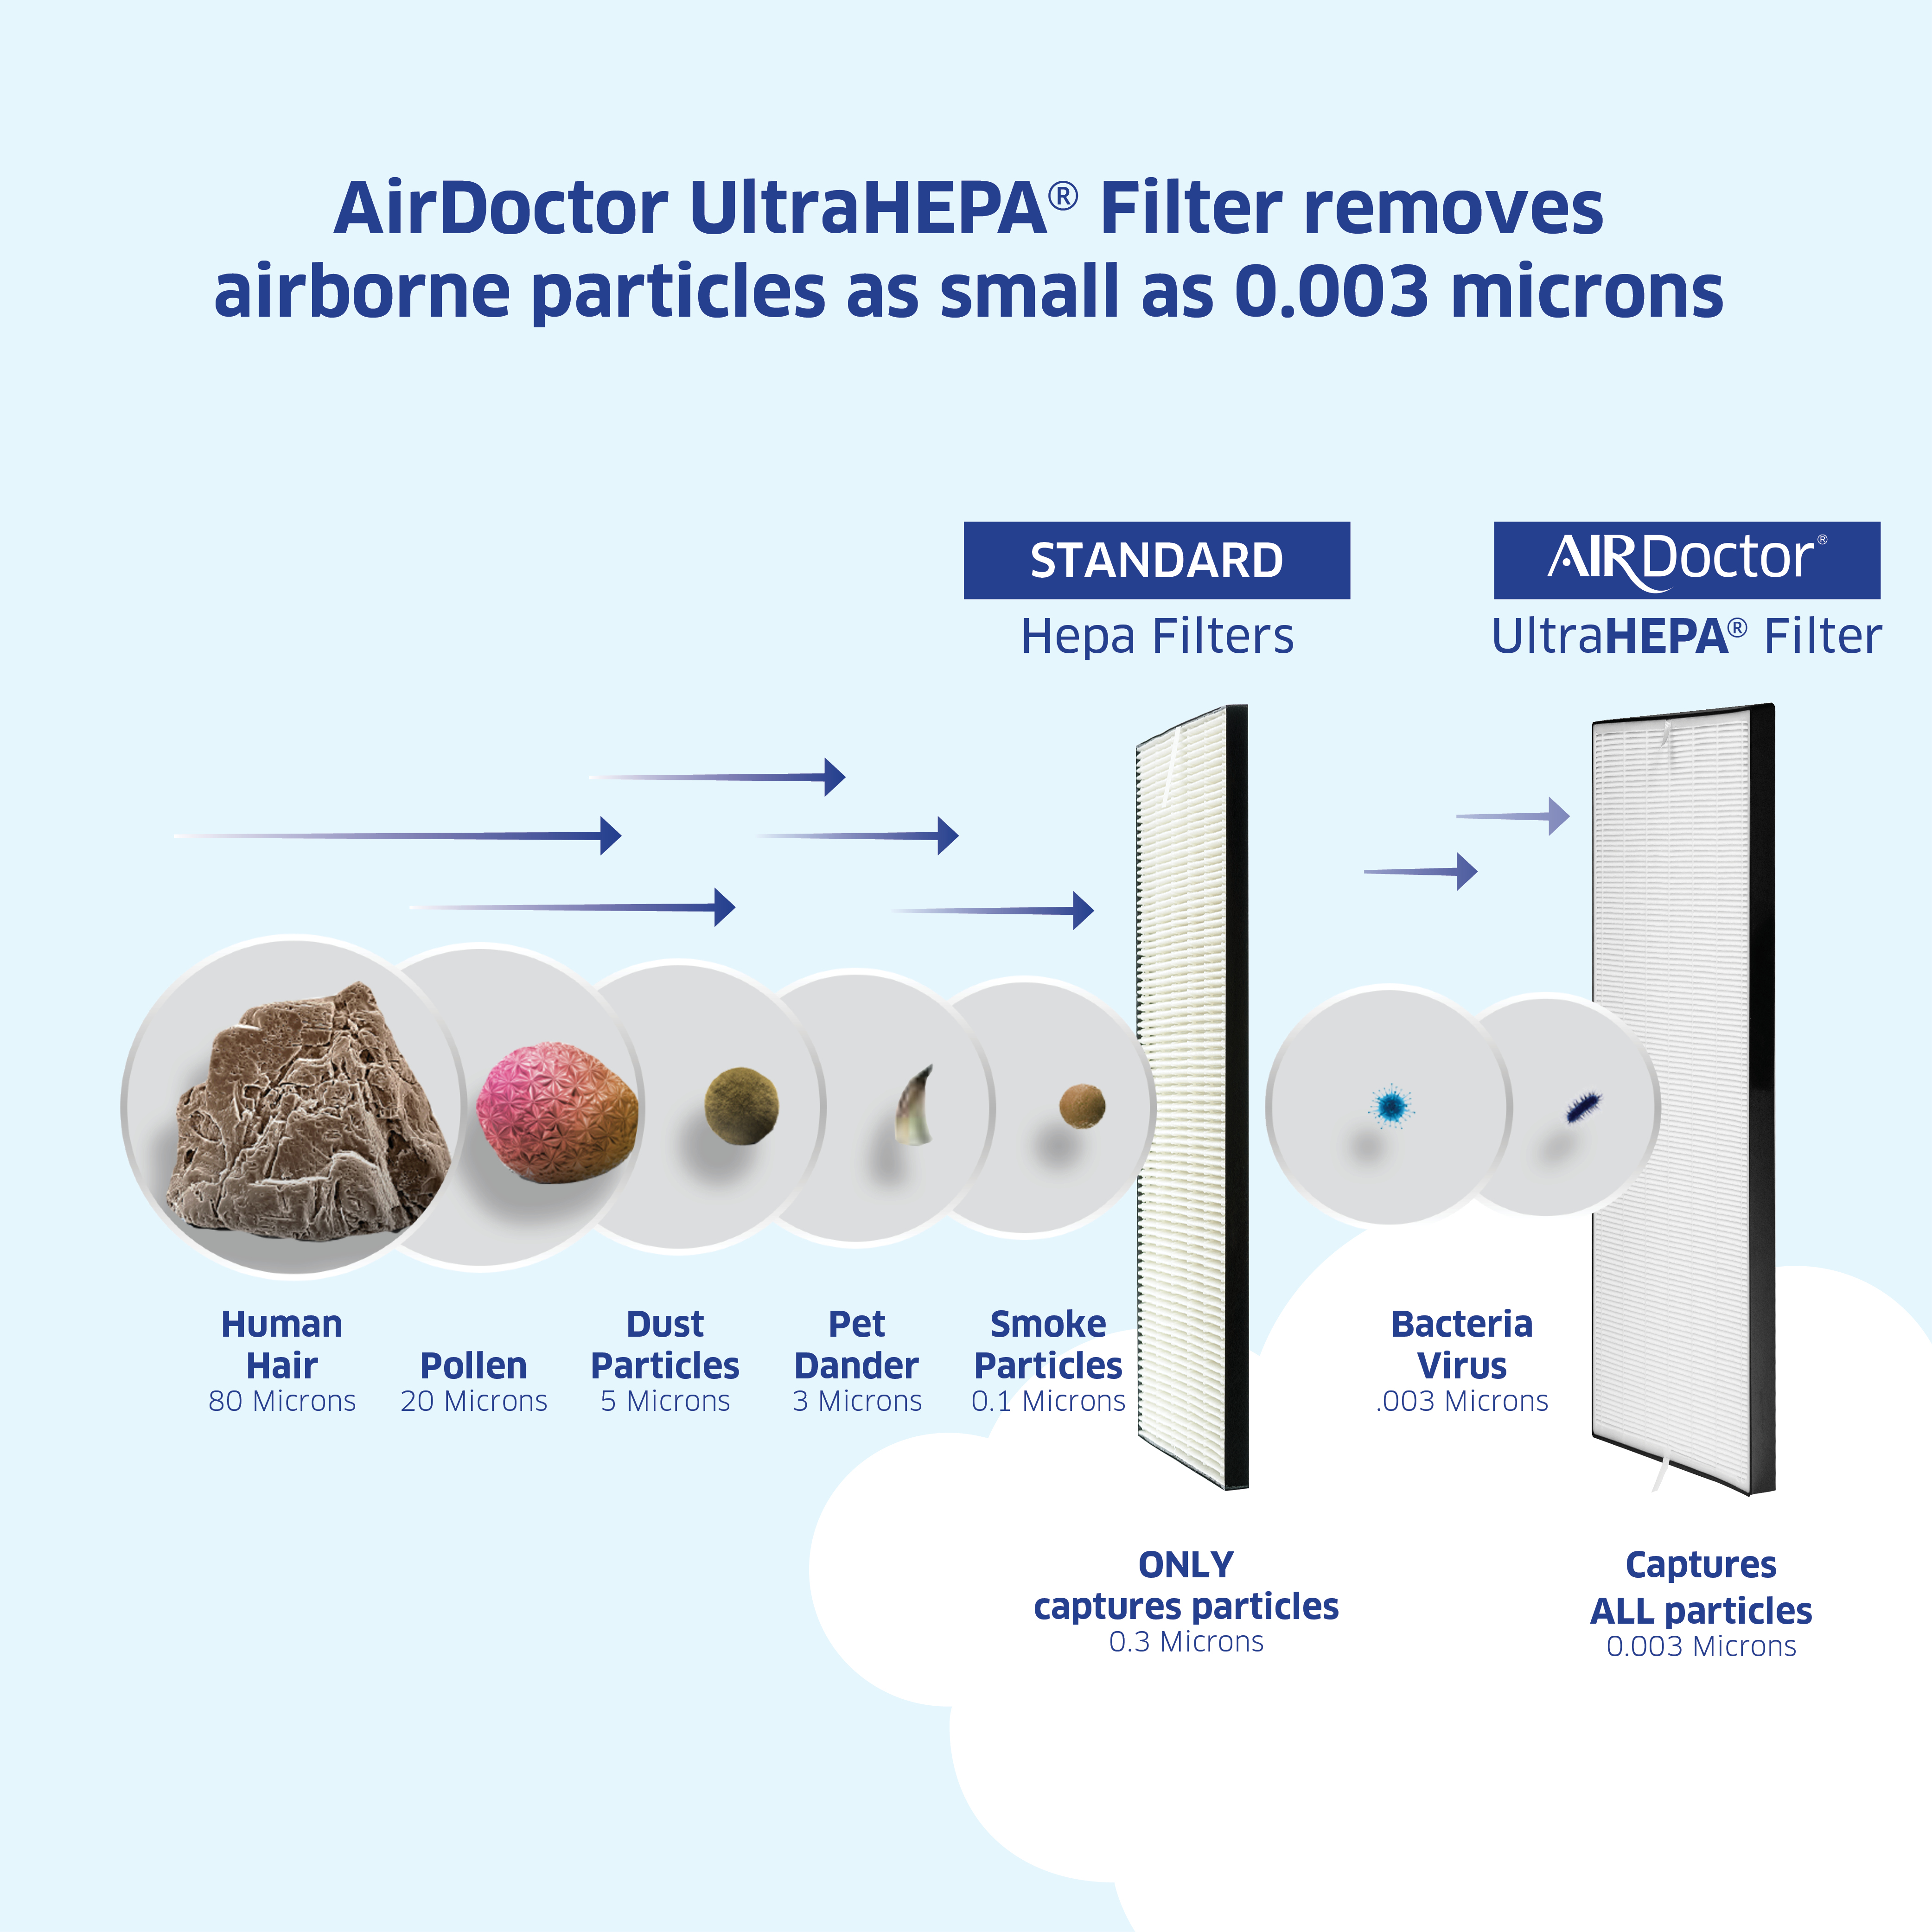 AIRDOCTOR AD3000 Air Purifier for Home and Large Rooms with UltraHEPA, Carbon, VOC Filters and Air Quality Sensor. Removes Particles 100x Smaller Than - 3